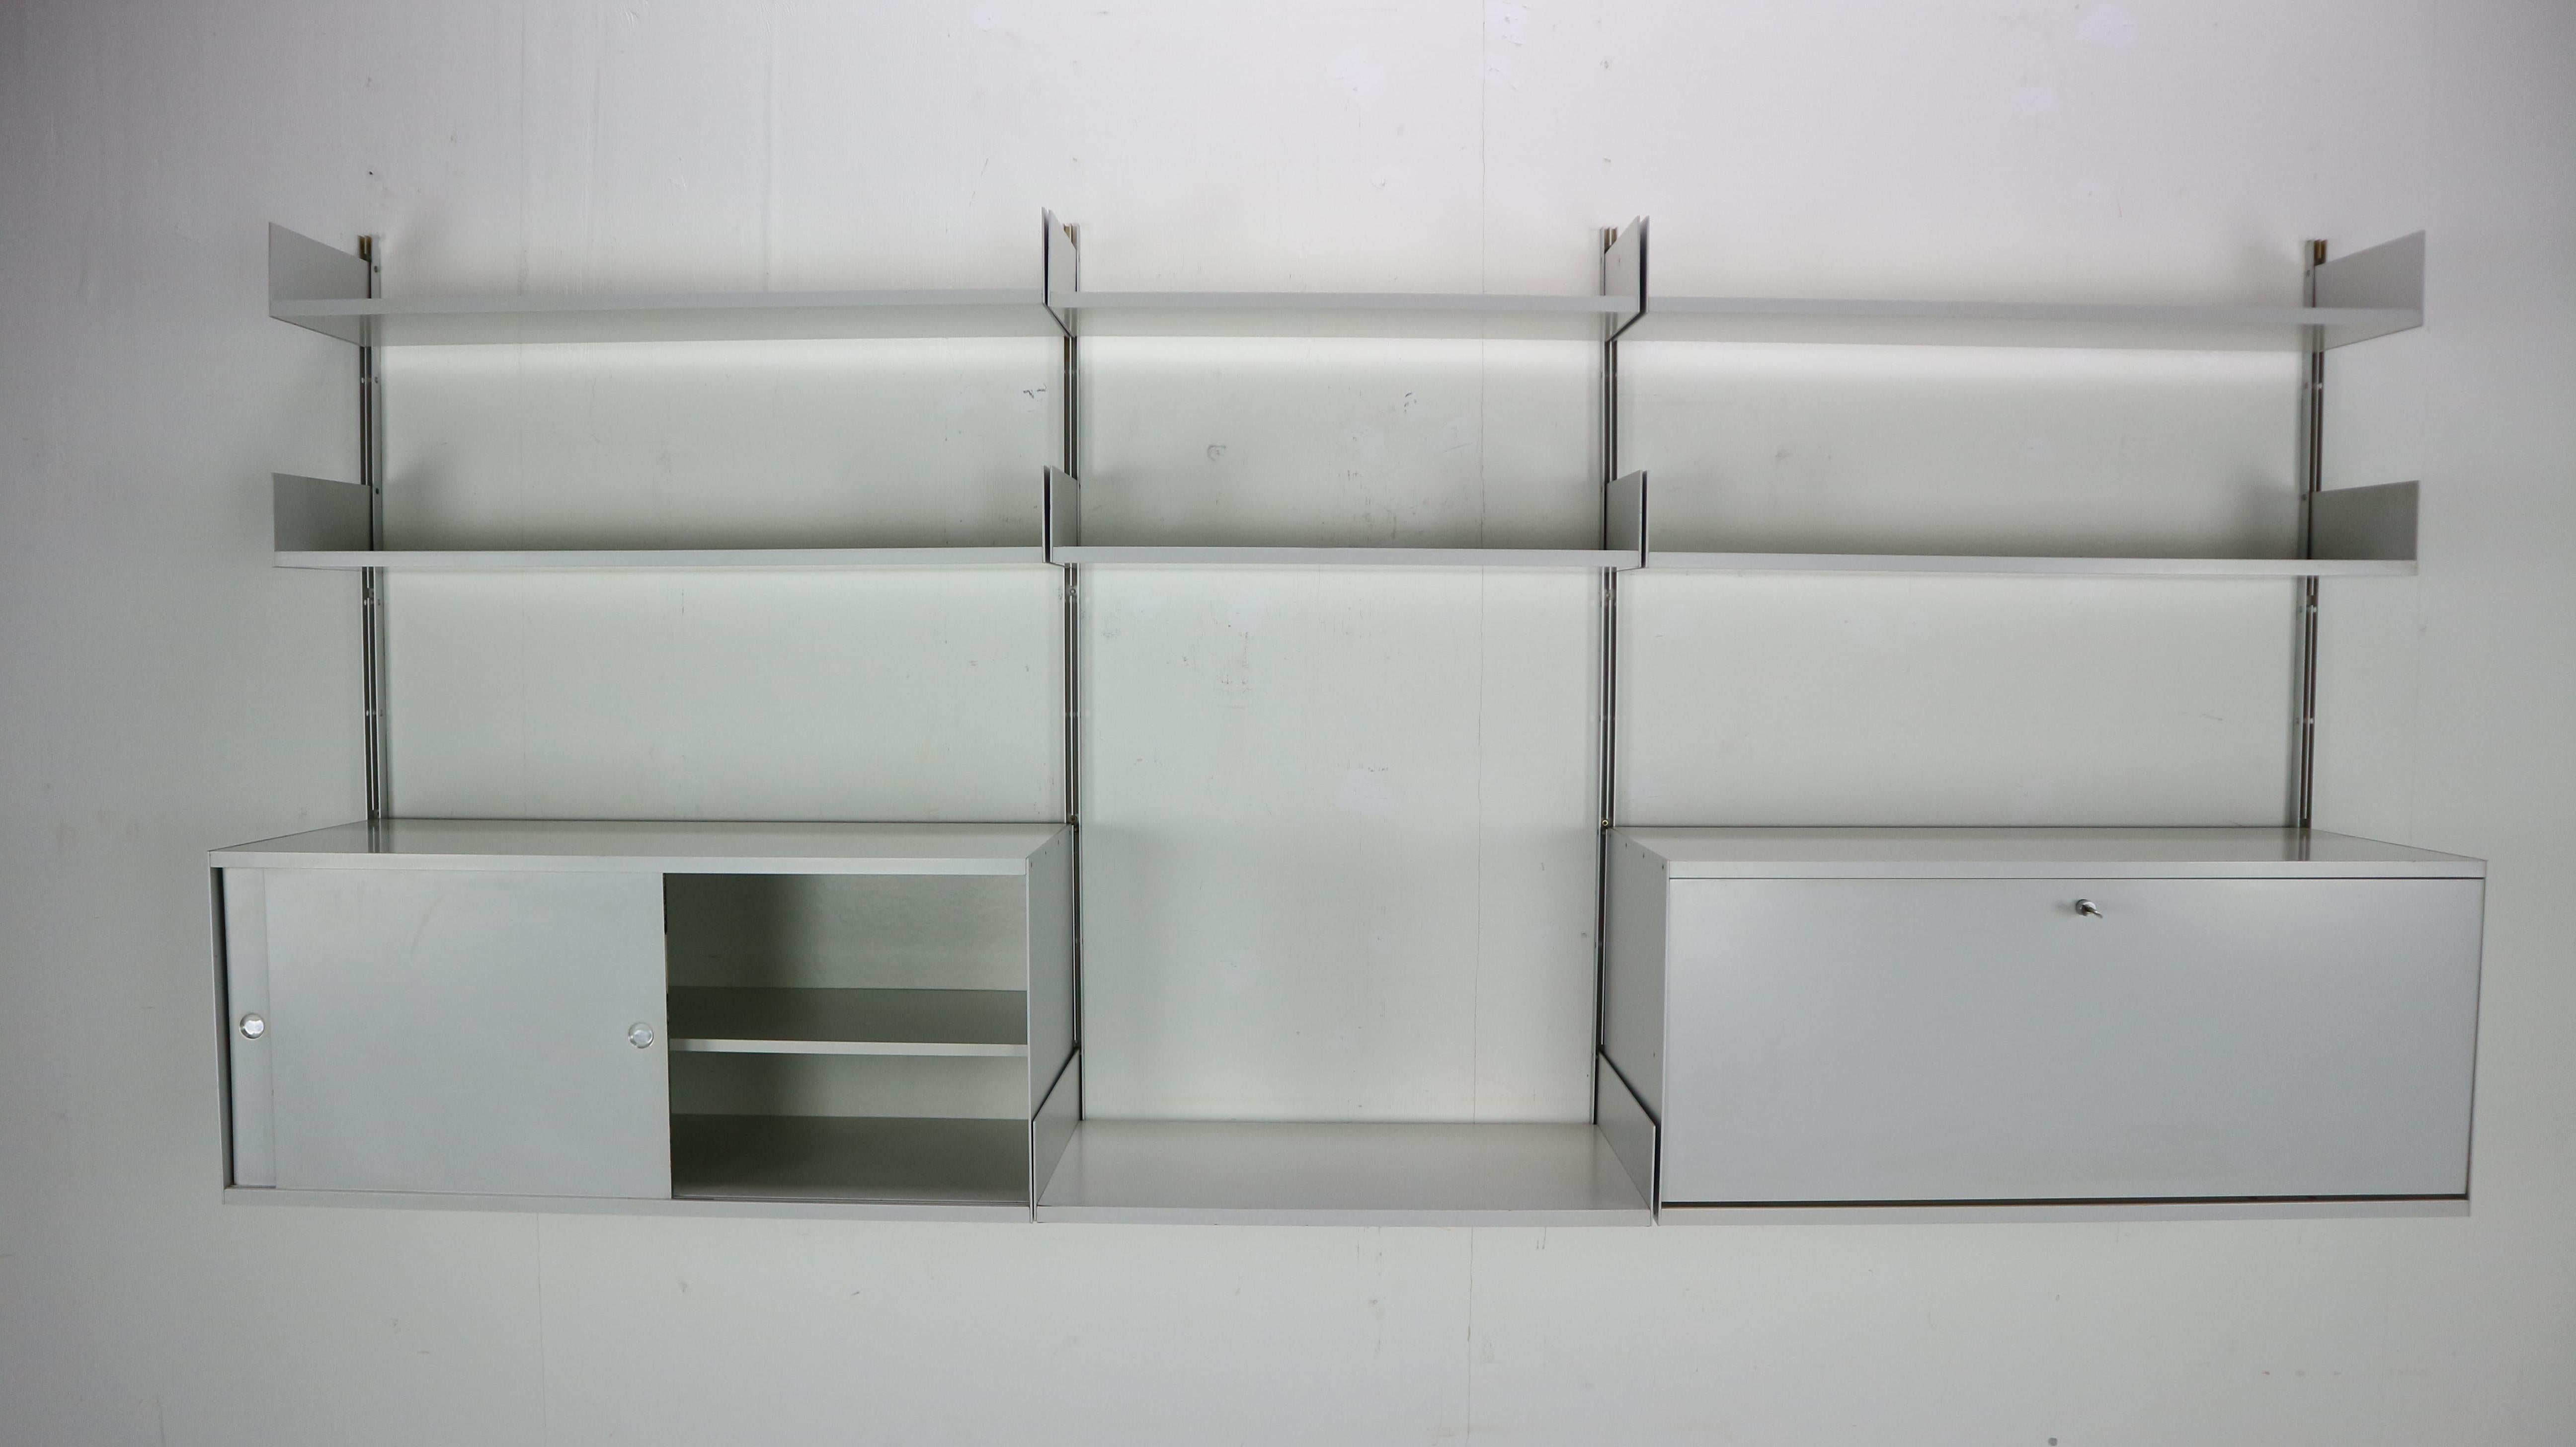 Industrial design wall system made by Vitsoe in Germany. Design by Dieter Rams in 1960.
Model number: 606.
Universal shelving system made from aluminum and comprises with 1 lock cabinets, 1cabinets and 7 shelves.
 